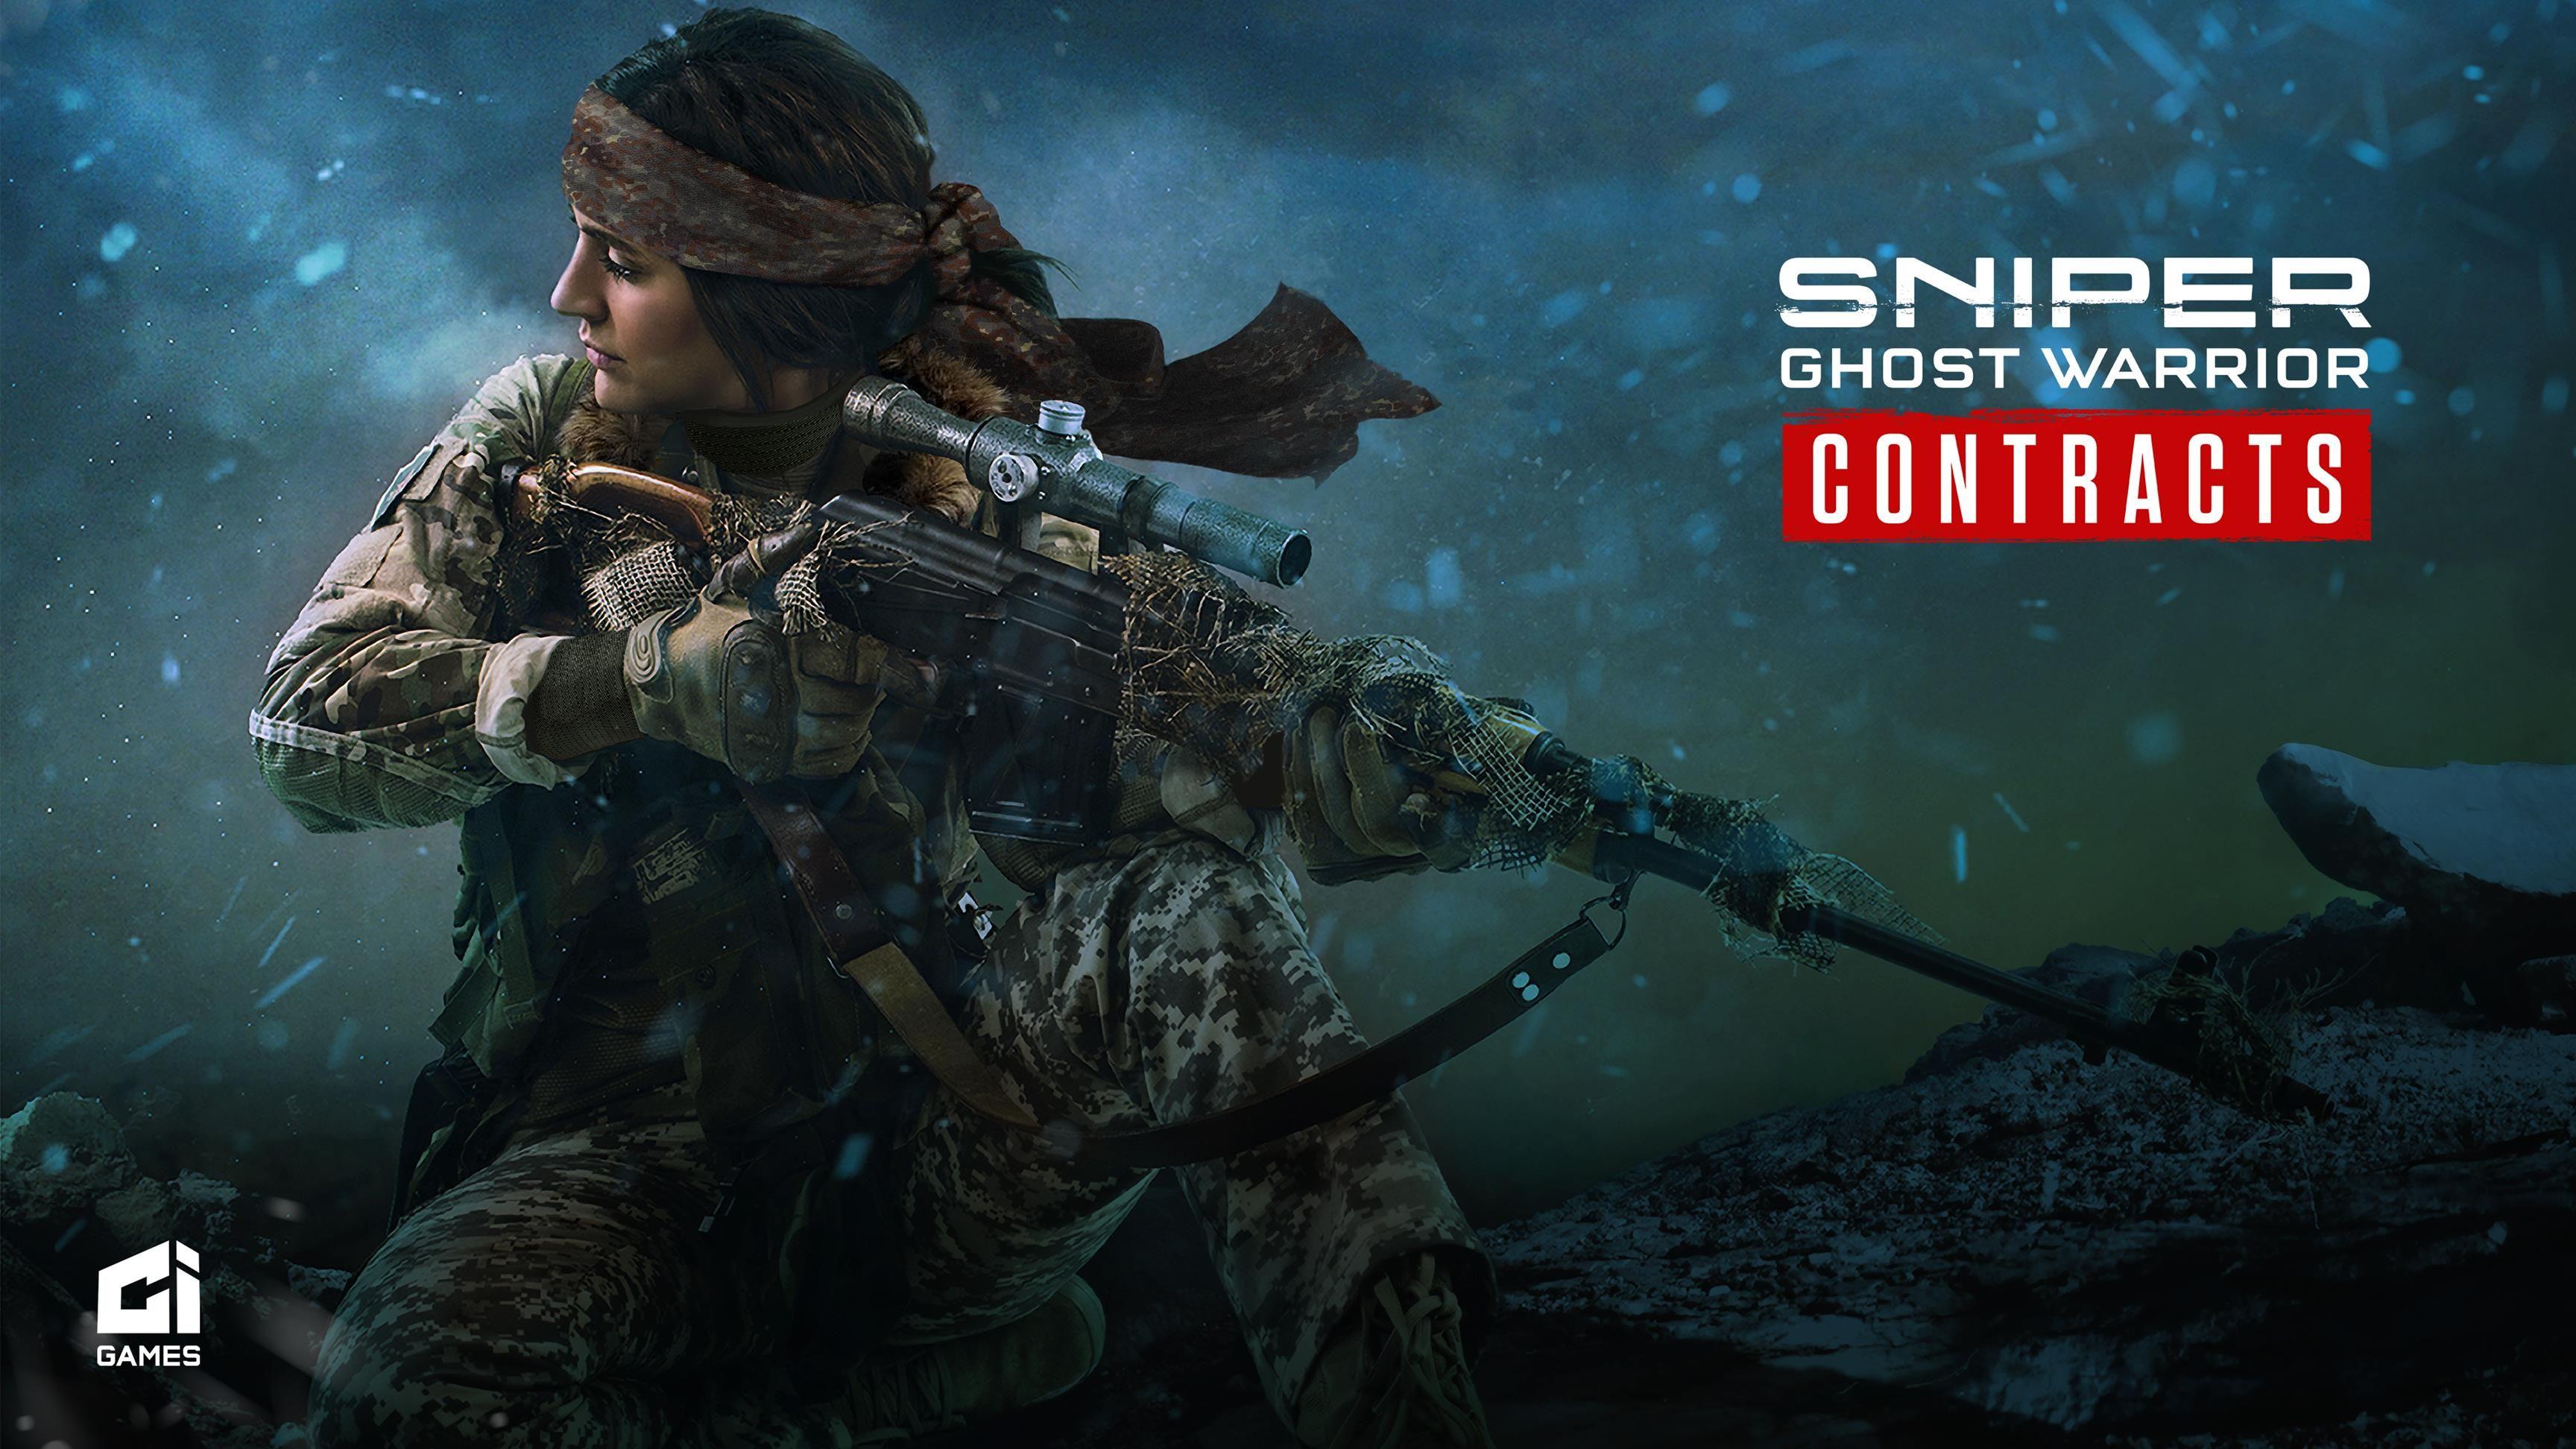 Sniper Ghost Warrior Contracts is the next game in the series coming